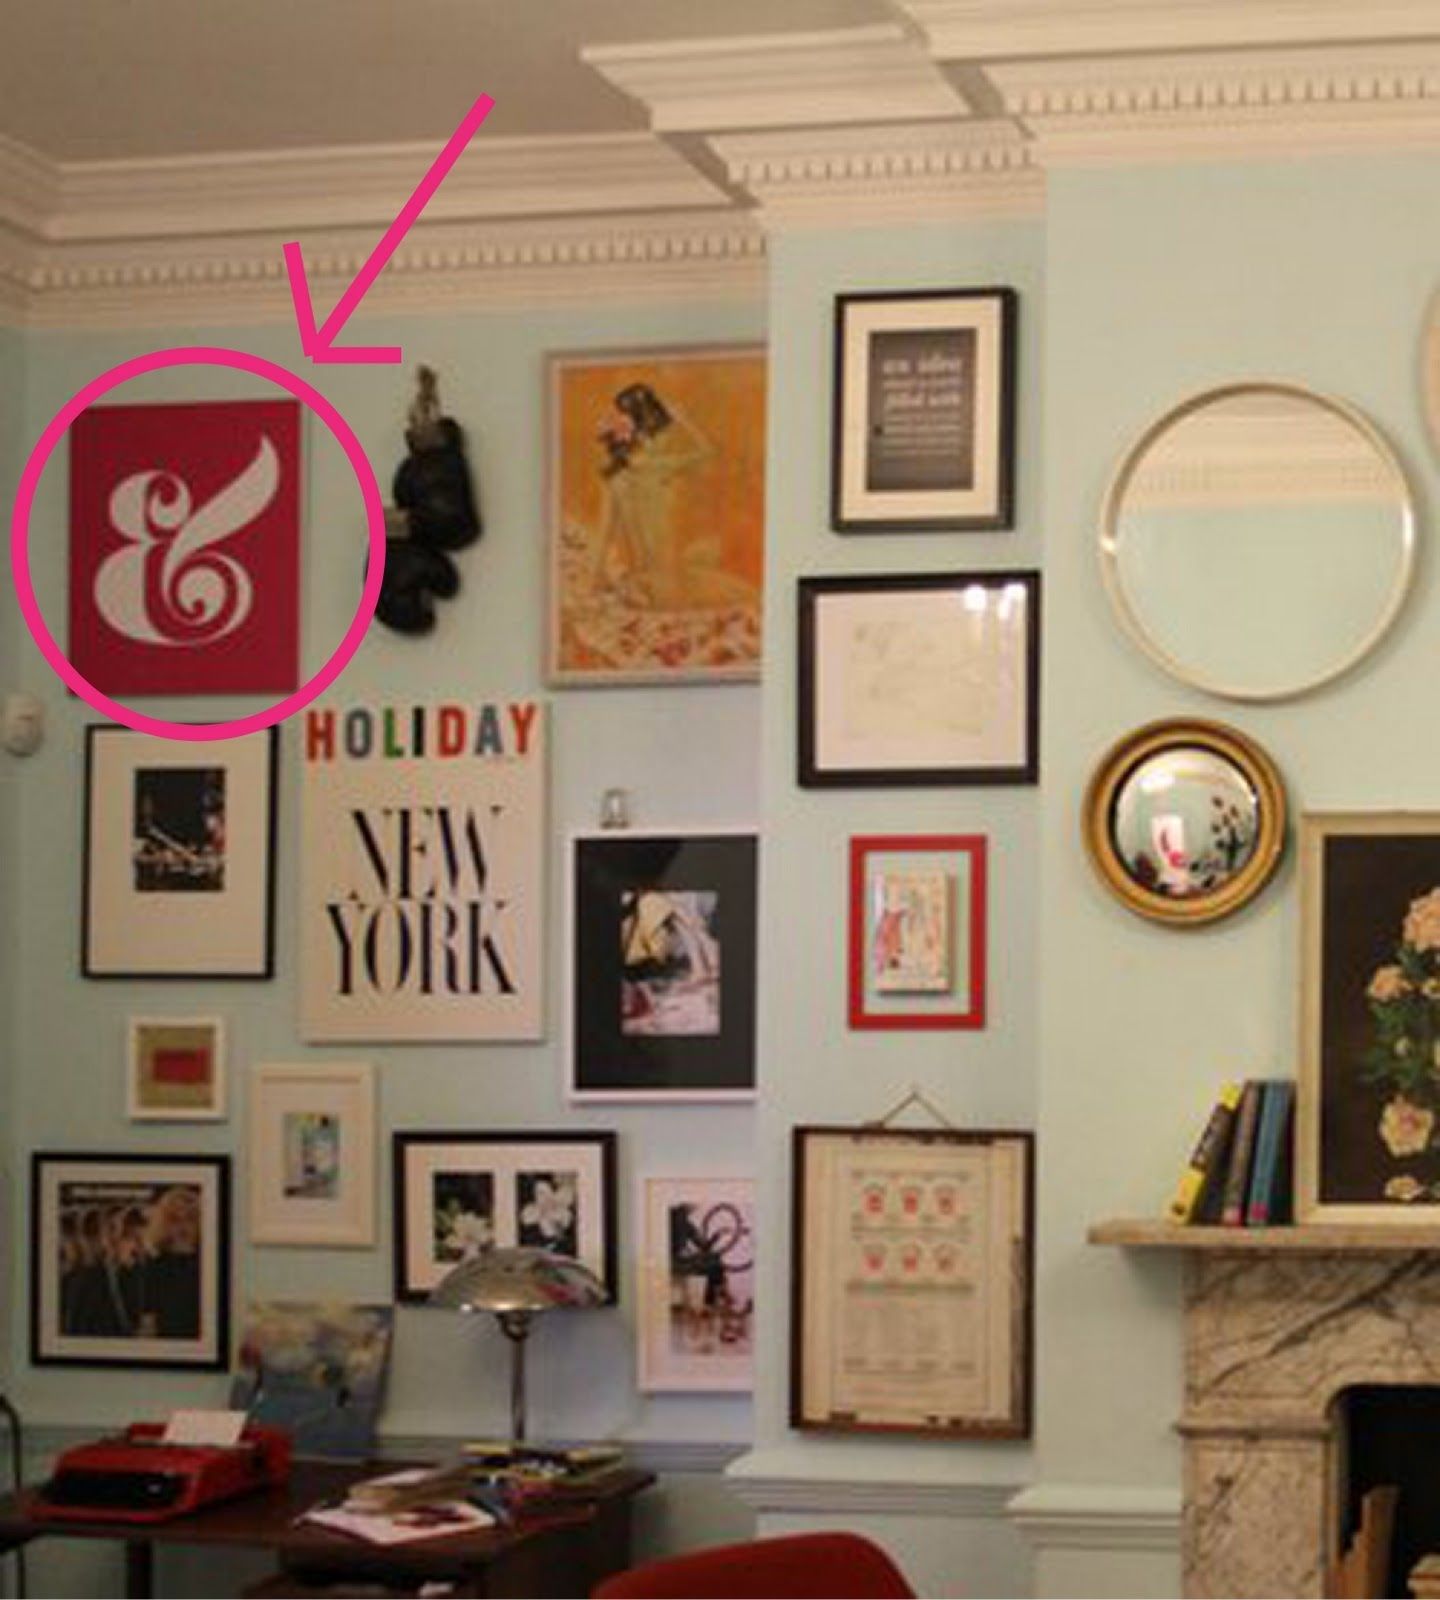 A Home In The Making: {create} Ampersand Wall Art, Kate Spade Wall Throughout Kate Spade Wall Art (View 16 of 20)